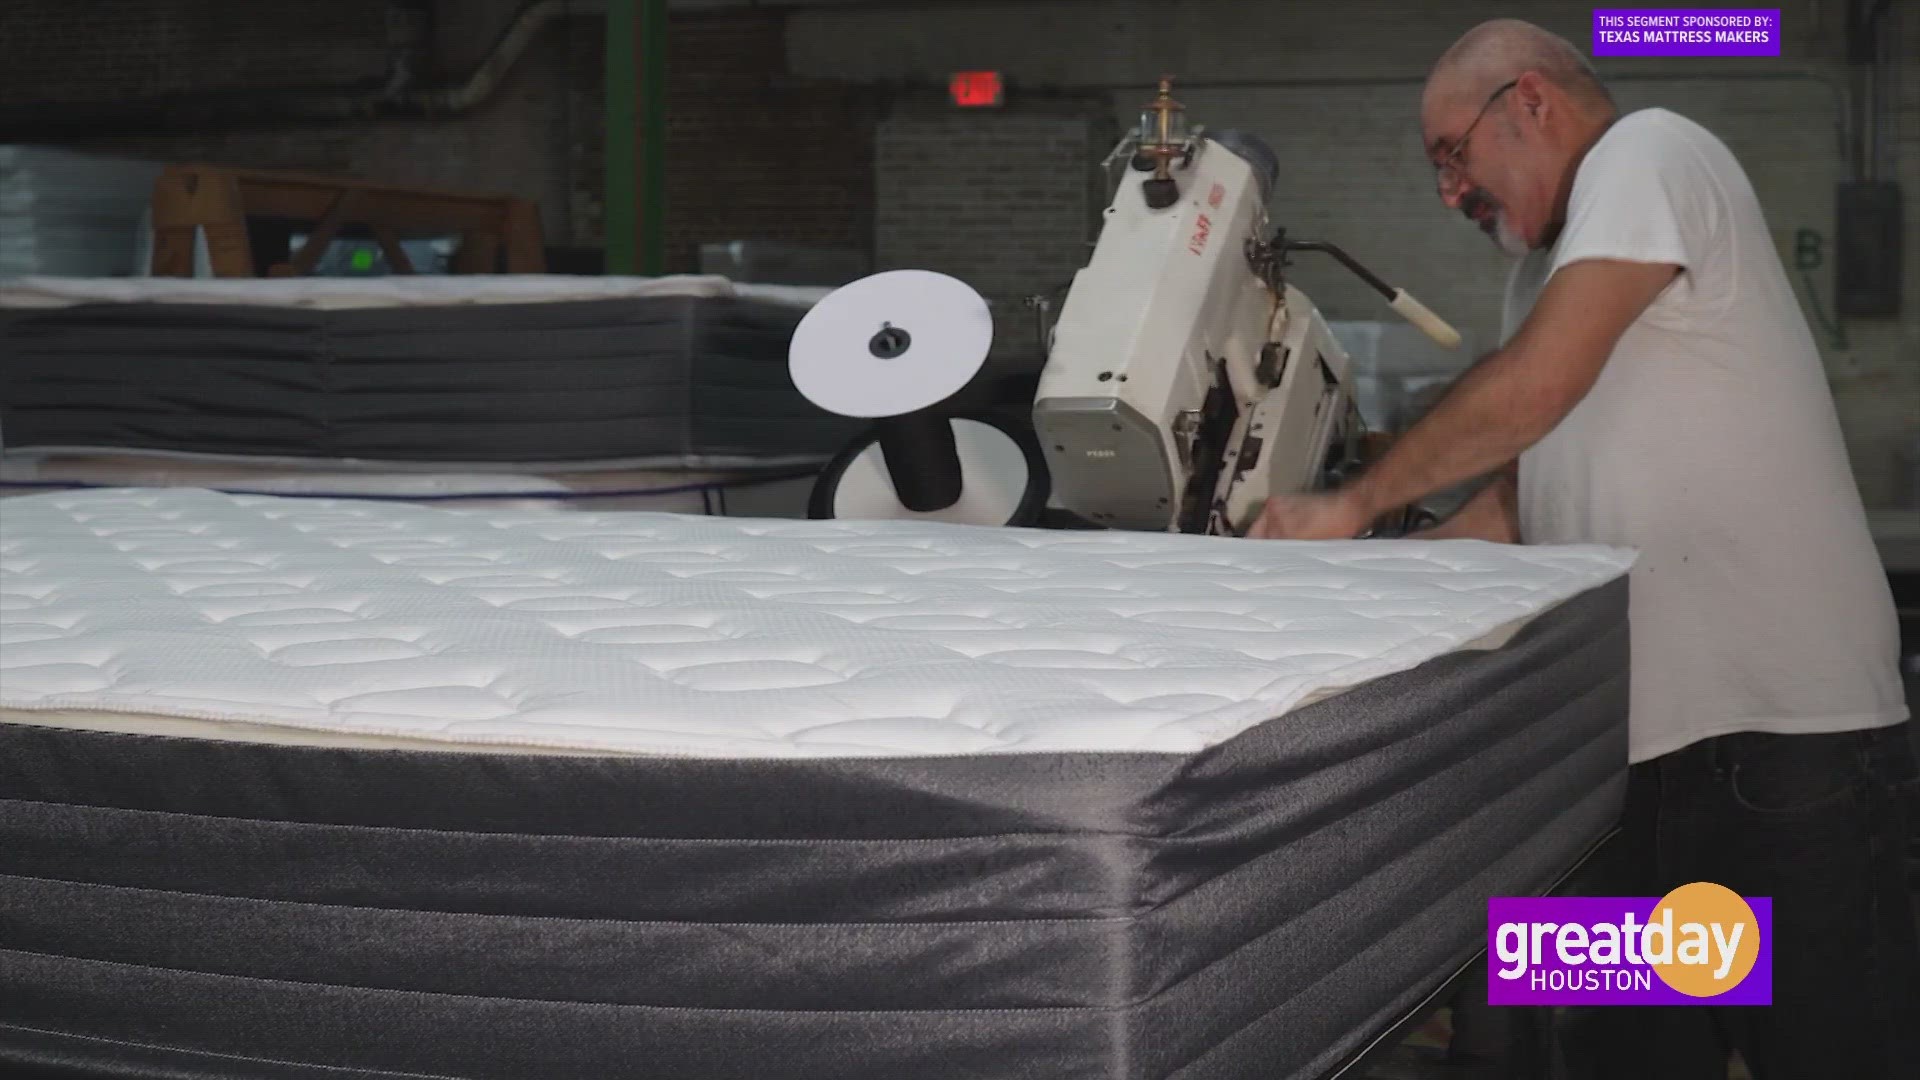 Texas Mattress Makers owner Youval Meicler isn't losing any sleep about closing his stores on Memorial Day. Instead, get great deals all throughout May.